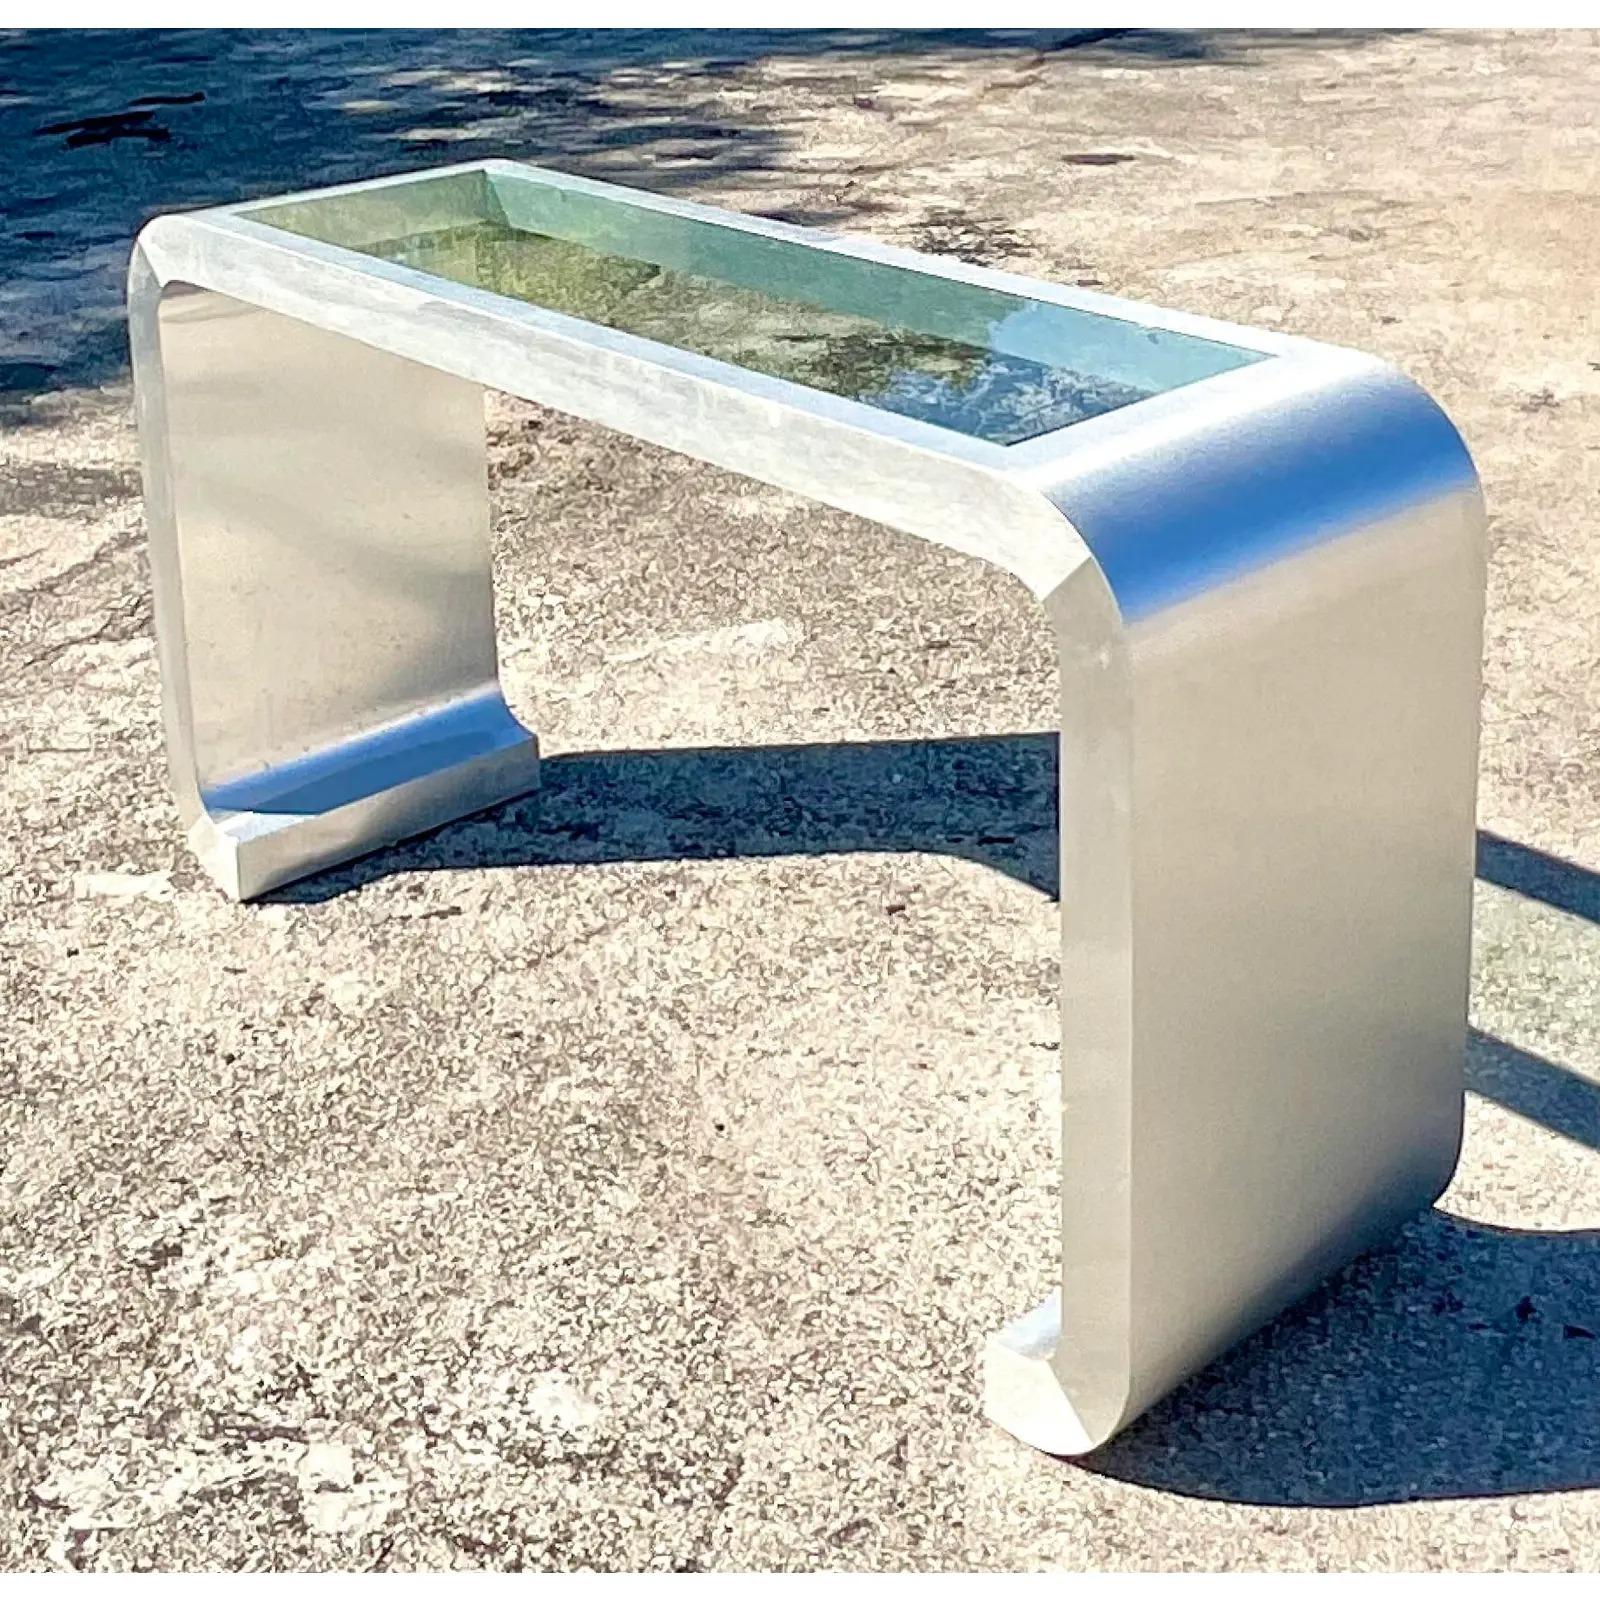 Fantastic vintage 80s console table. A chic waterfall design in a brushed chrome look. Tall in size with an inset glass panel on top. Acquired from a Palm Beach estate.